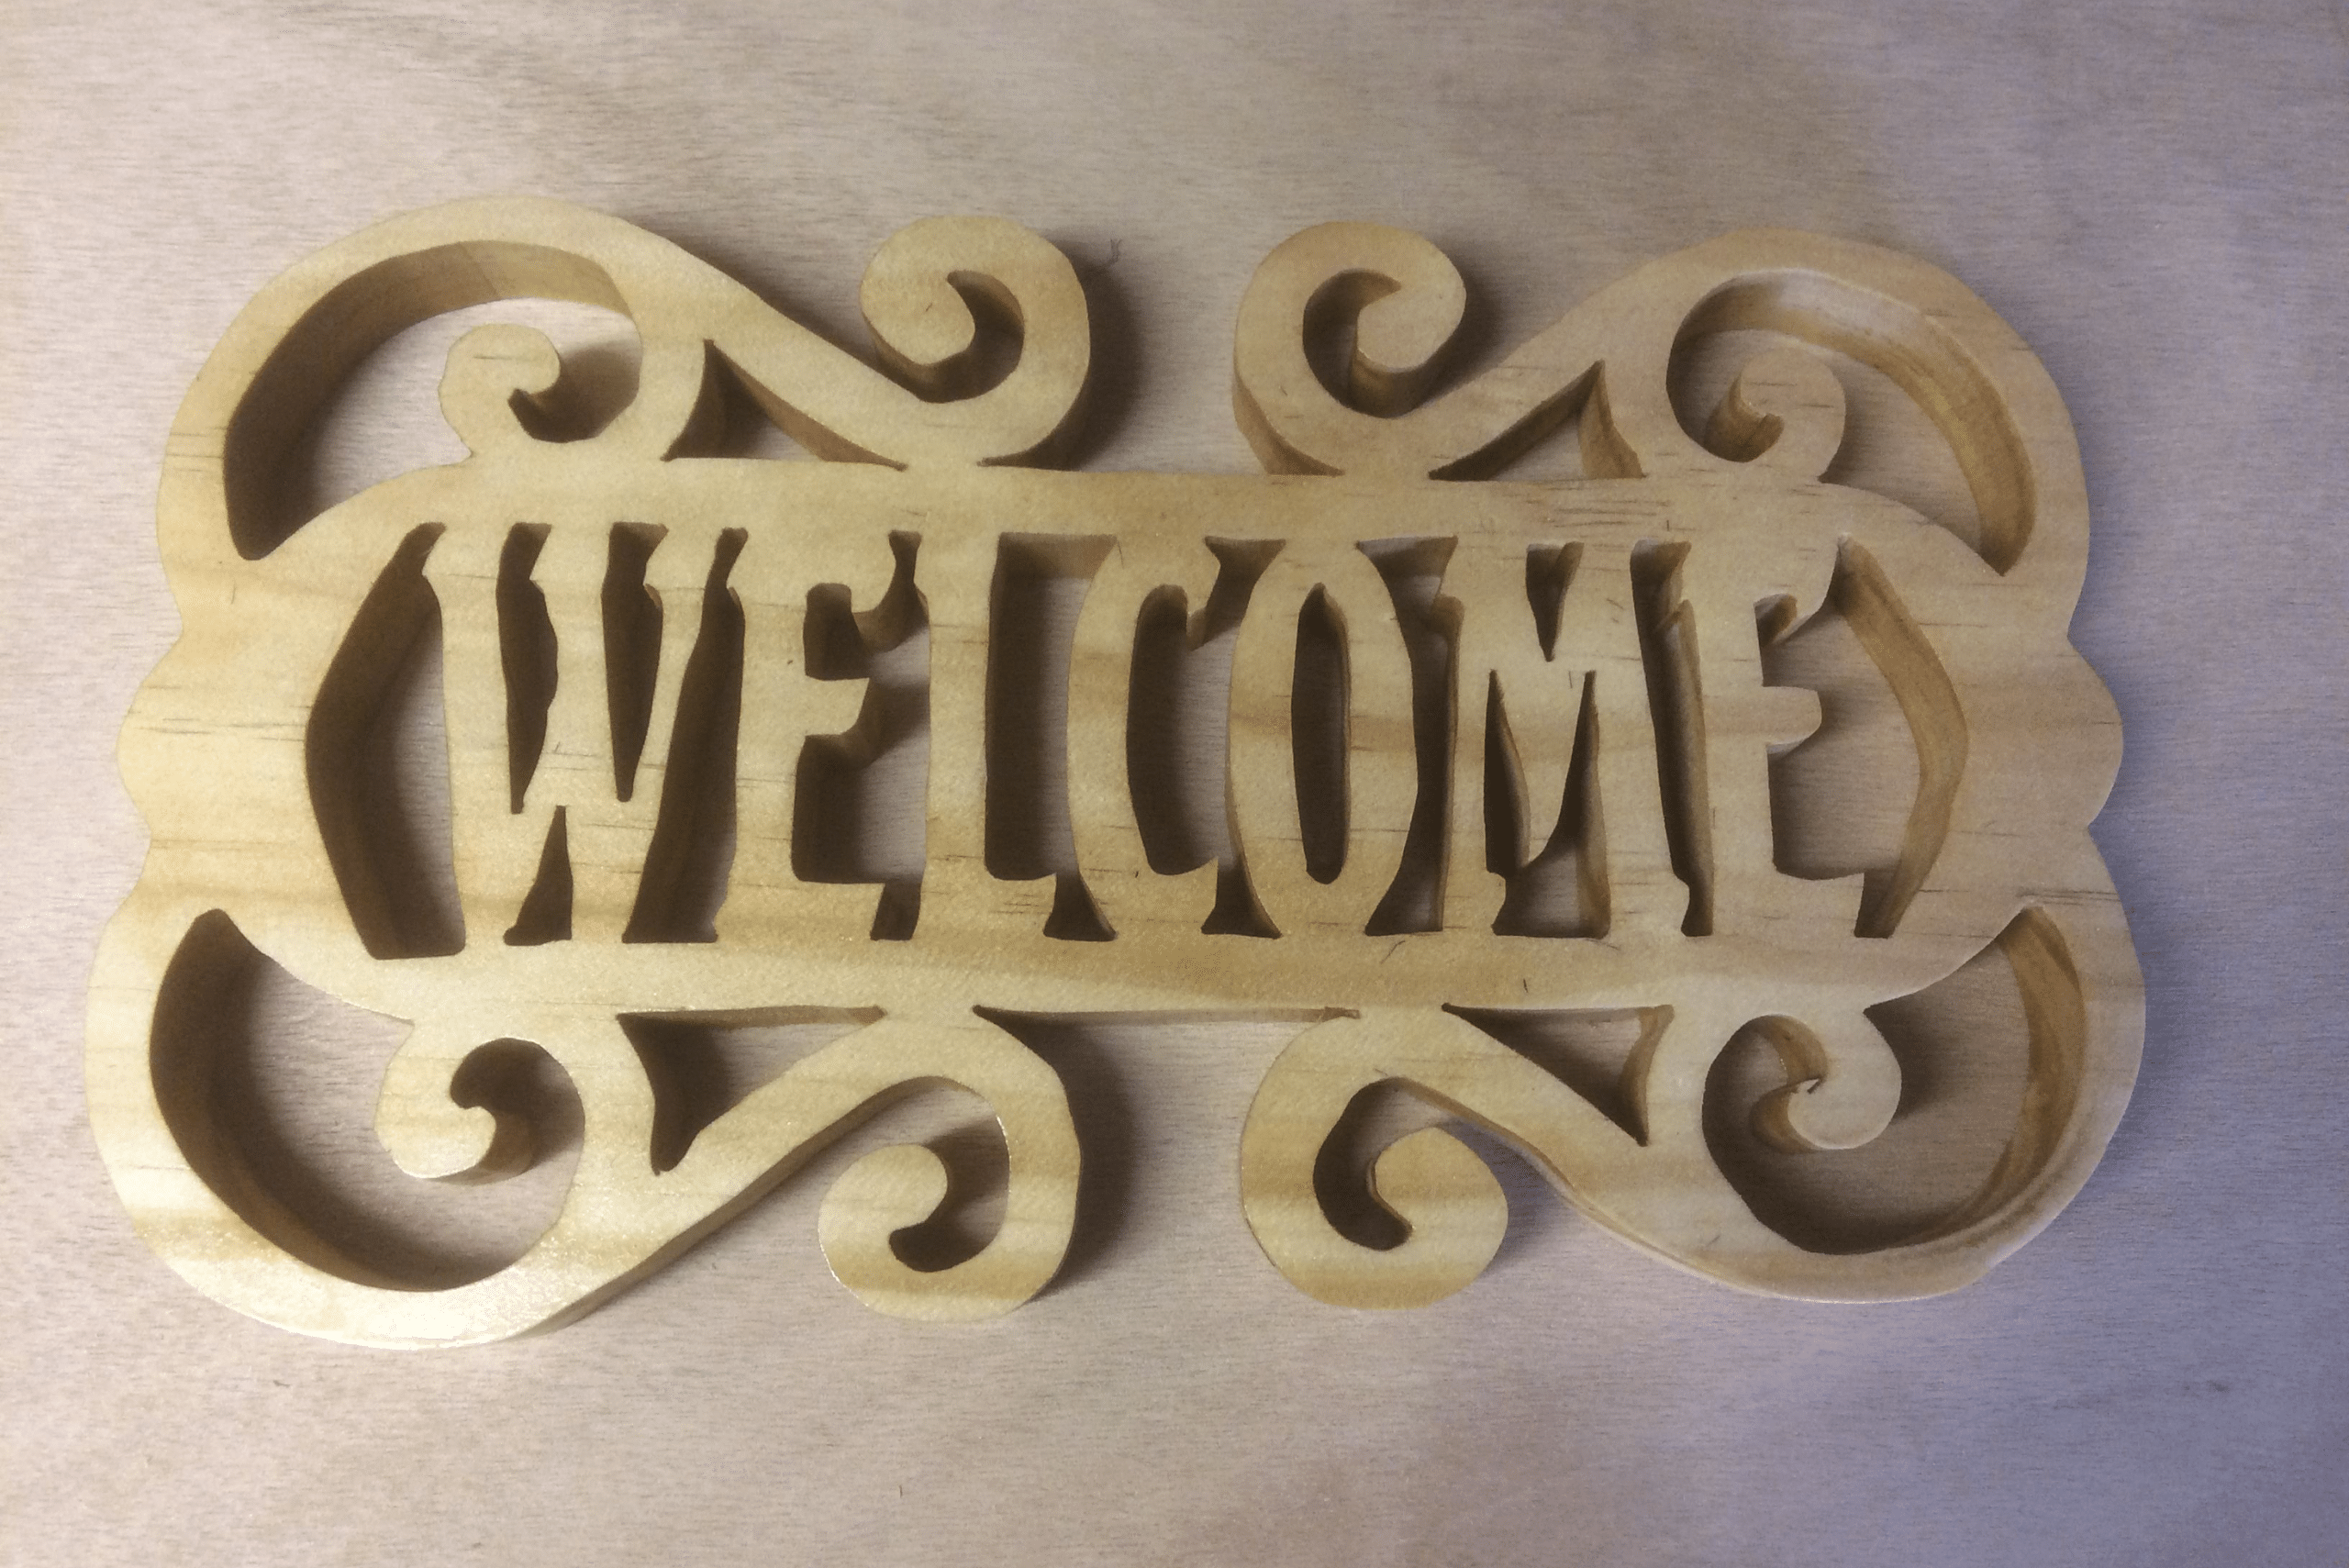 An outdoor wooden welcome sign made using a scroll saw.